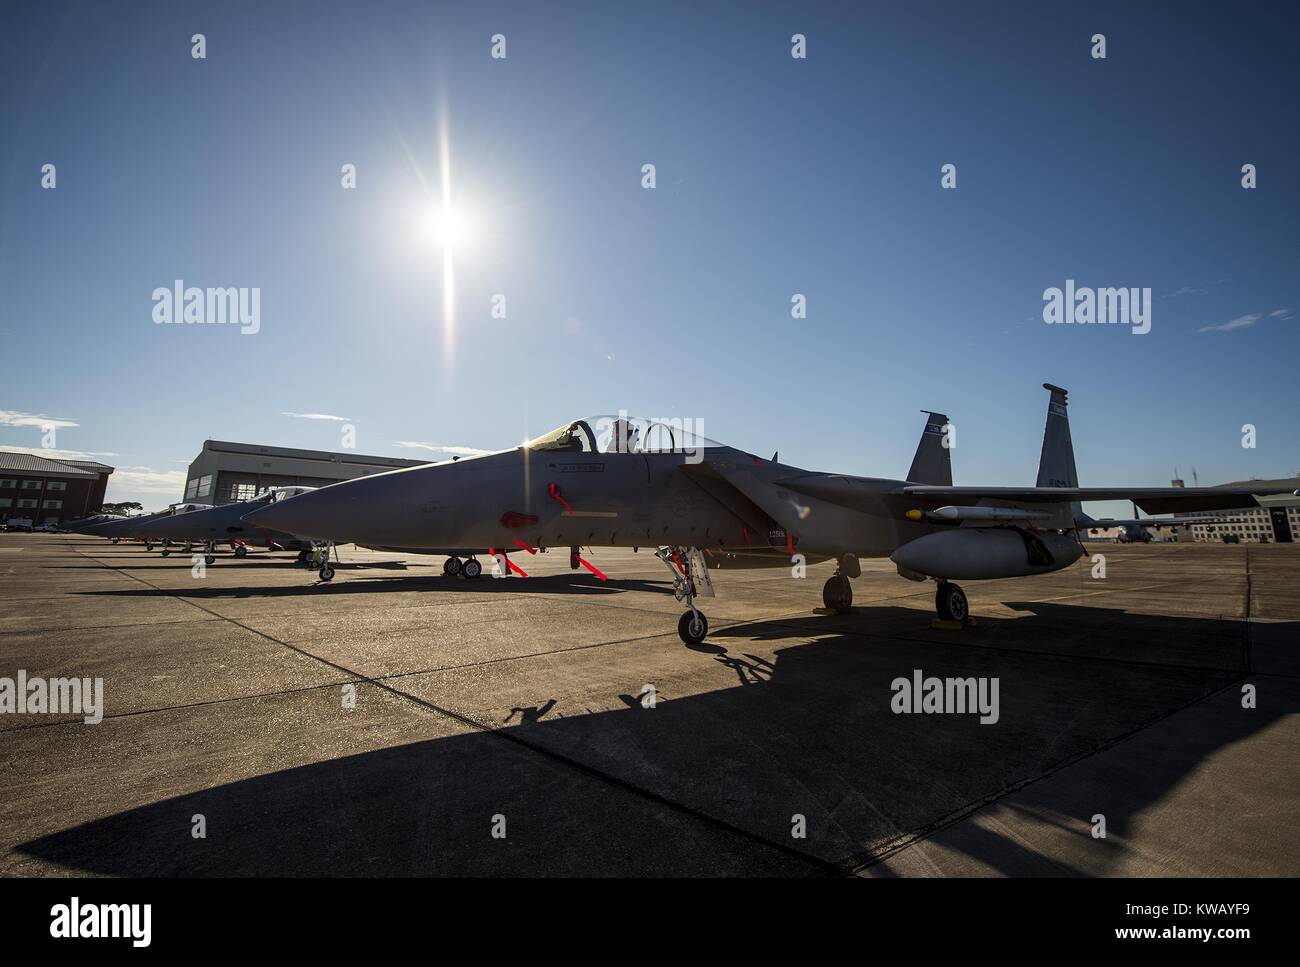 Clear skies and bright sun shines down on a row of 125th Fighter Wing F-15s from Jacksonville Fla. on the Eglin Air Force Base flightline Oct. 7, October 7, 2016. The Air National Guard unit sent 15 aircraft to ride out Hurricane Matthew here. The Marine Fighter Attack Squadron-501 sent 10 F-35Bs from South Carolina to the base for sheltering as well. The 96th Aircraft Maintenance Squadron's F-15 unit and the Navy's Strike Fighter Squadron 101 provided support to the transient aircraft. (U.S. Air Force photo/Samuel King Jr.). Stock Photo